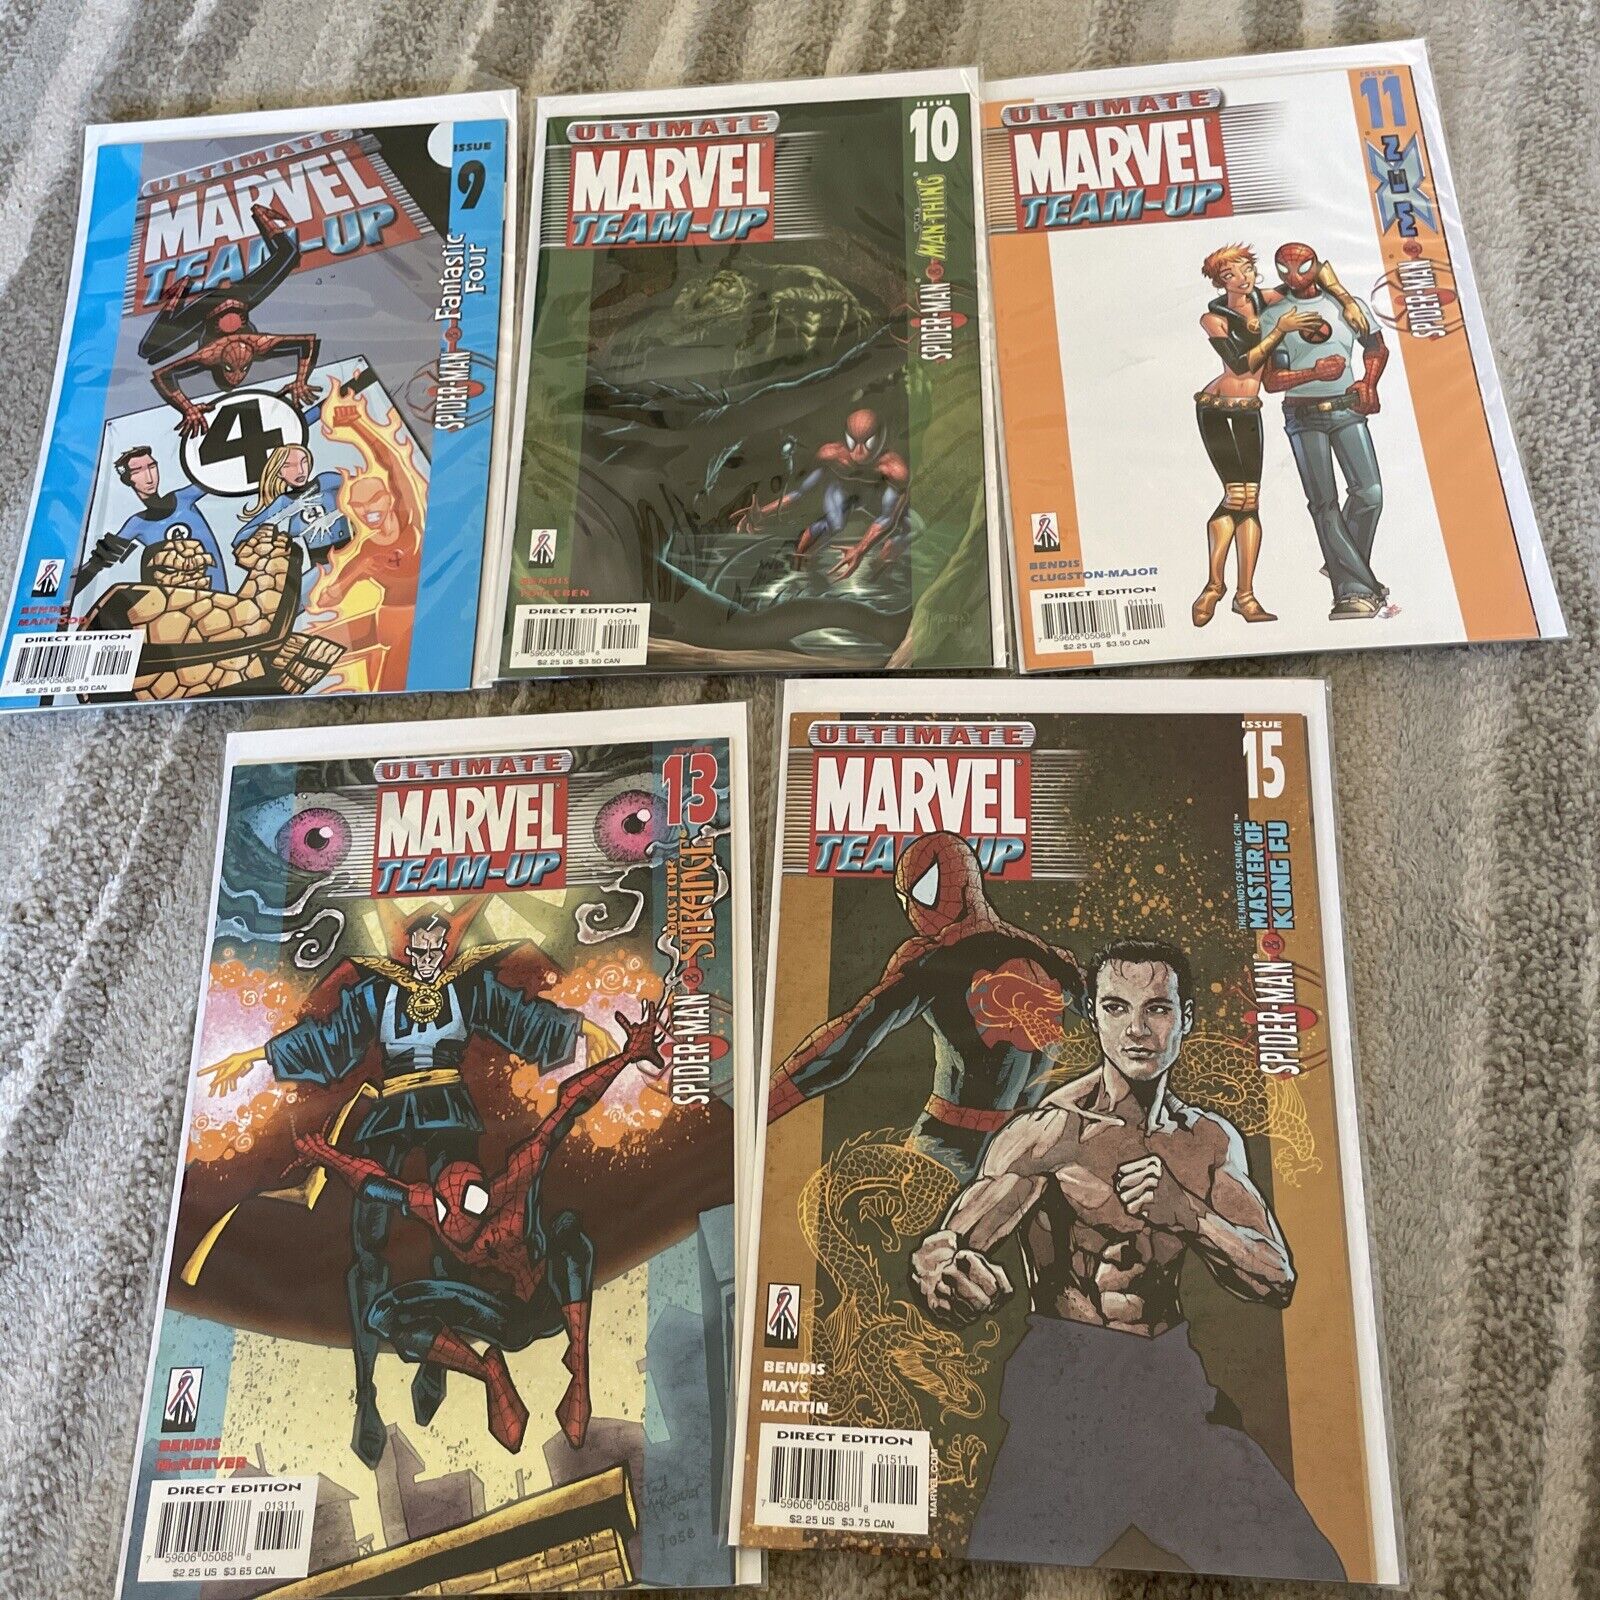 Set Of 5 Ultimate Marvel Team-Up  Including Issue #9, 10, 11, 13 And 15.